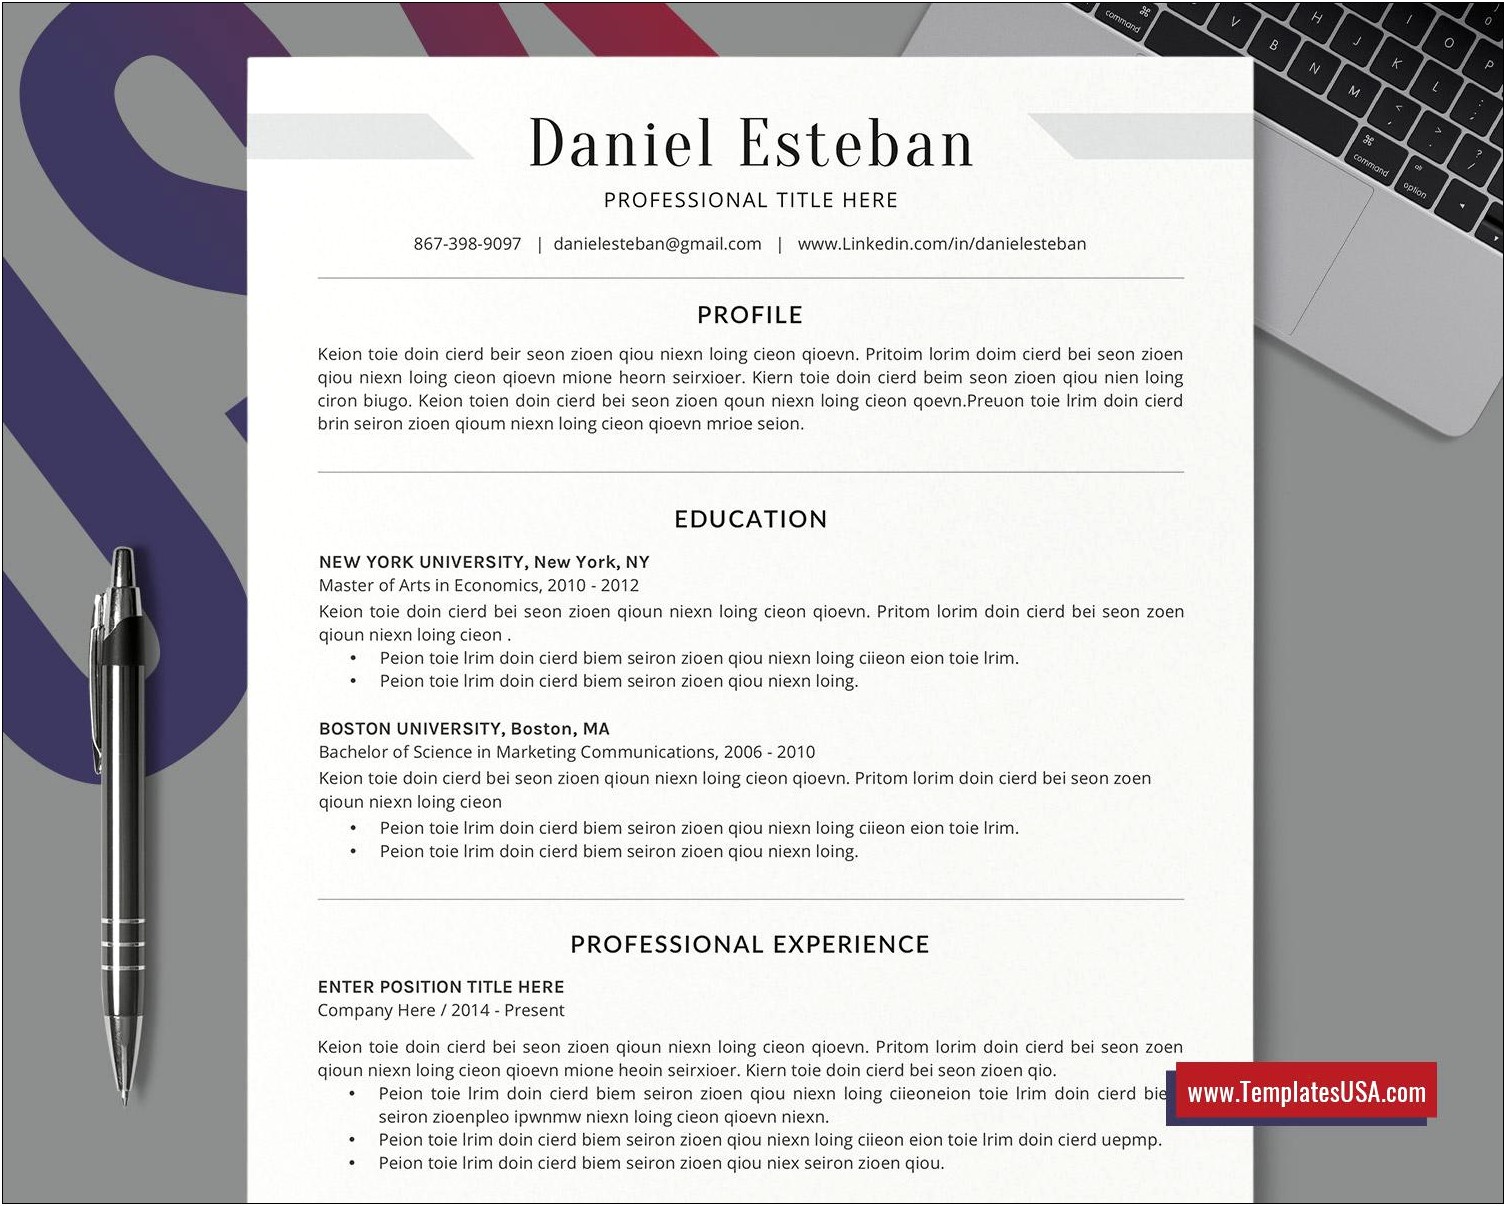 Resume Job Title First Or Company